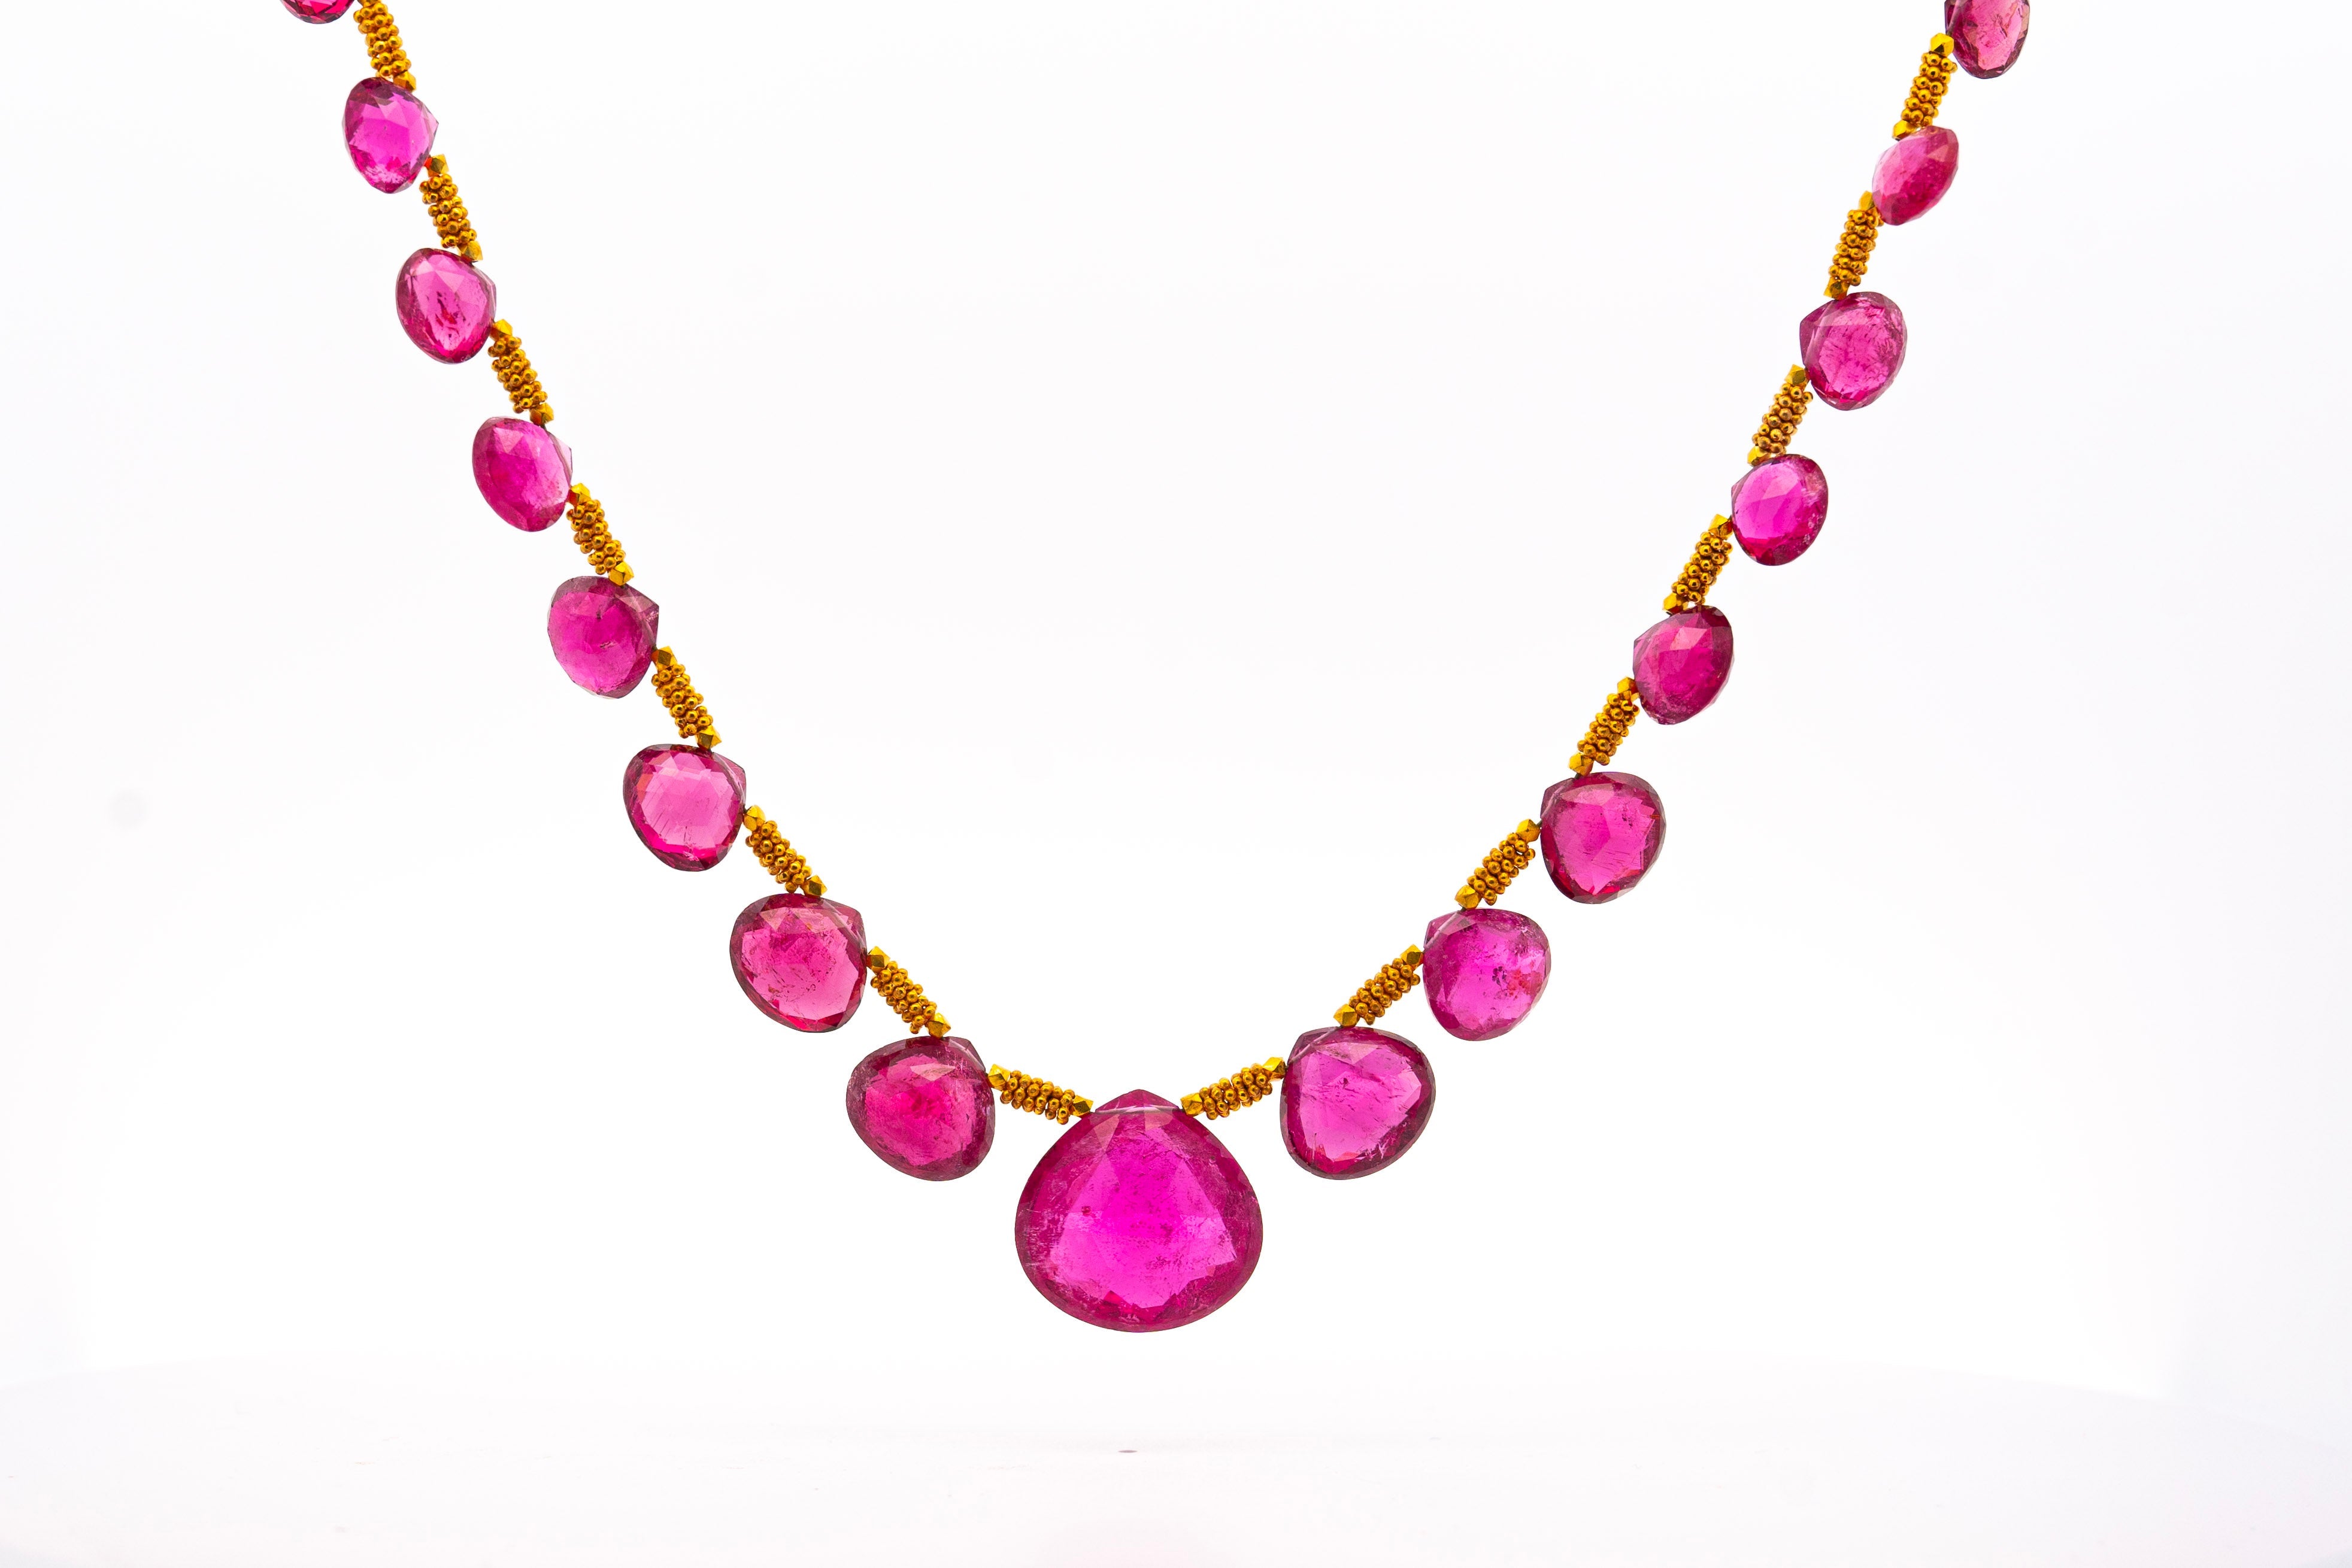 Vintage-GIA-Certified-120-carat-Pear-Shape-Pink-Rubellite-Tourmaline-Necklace-in-22k-Yellow-Gold-Necklace.jpg